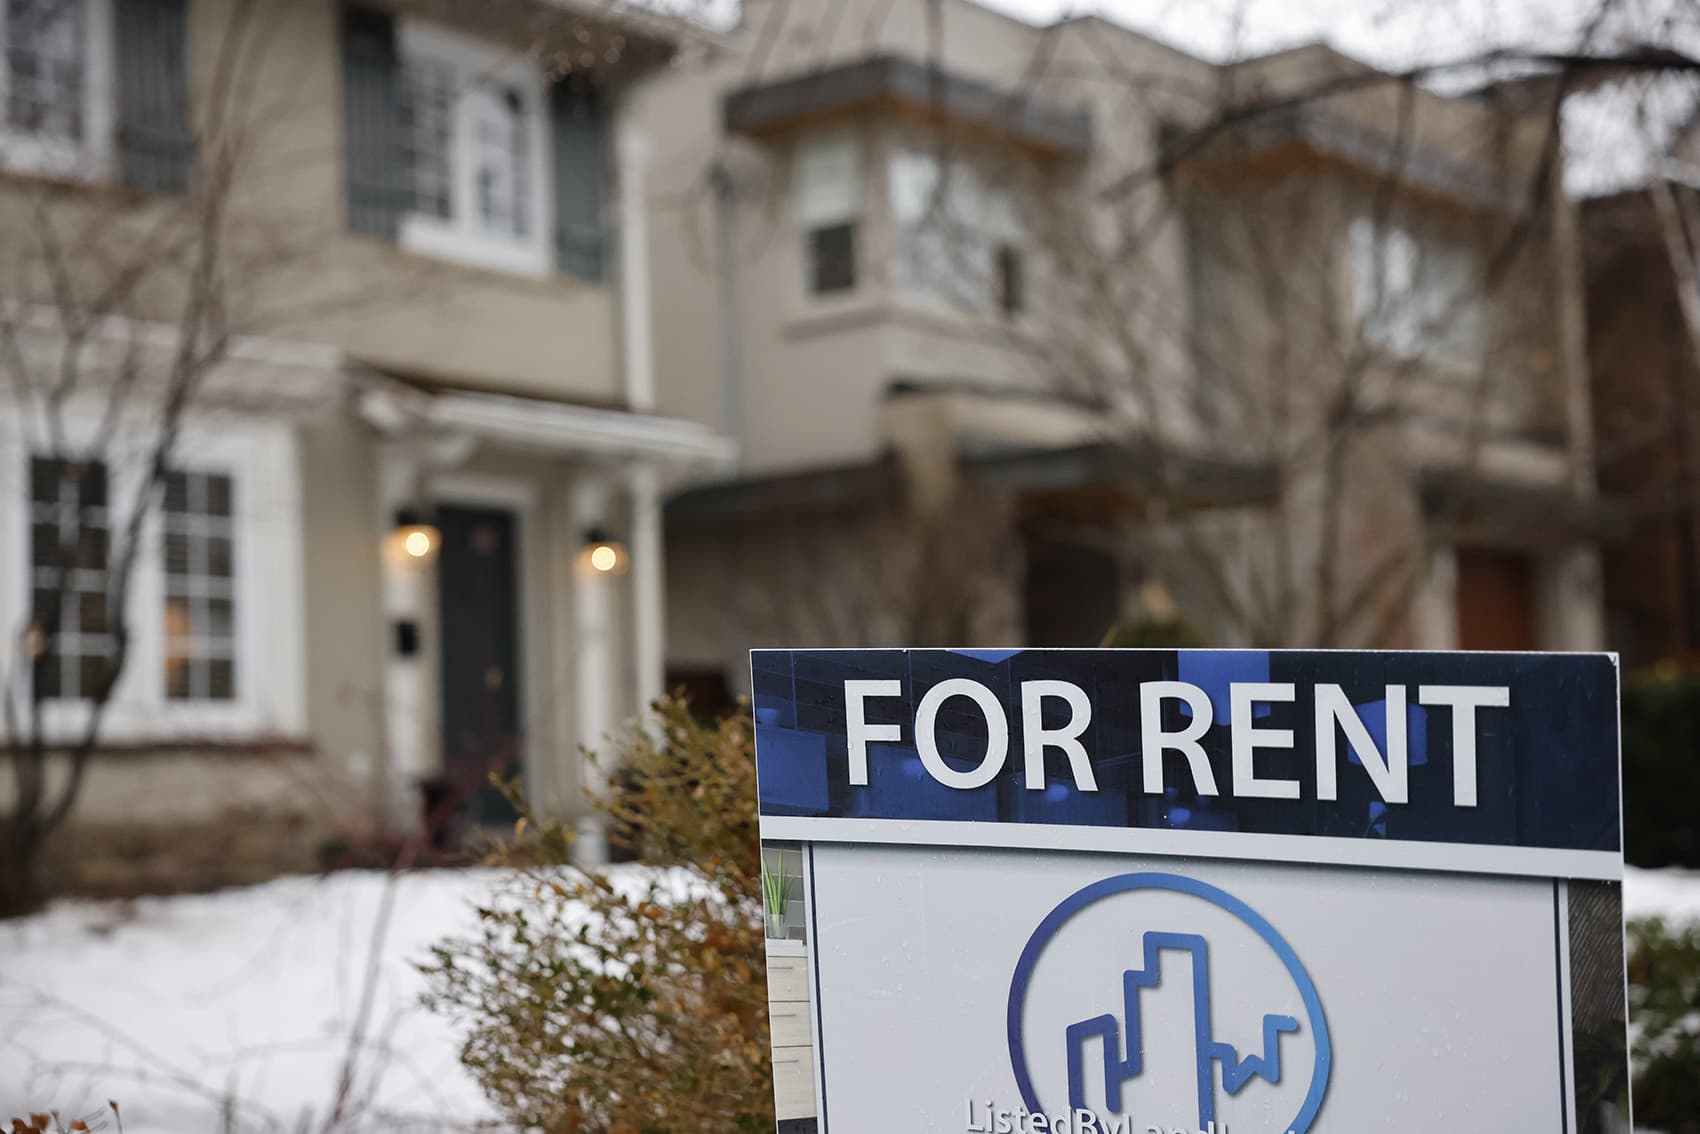 A &quot;for rent&quot; sign. (Lance McMillan/Toronto Star via GettyImages)